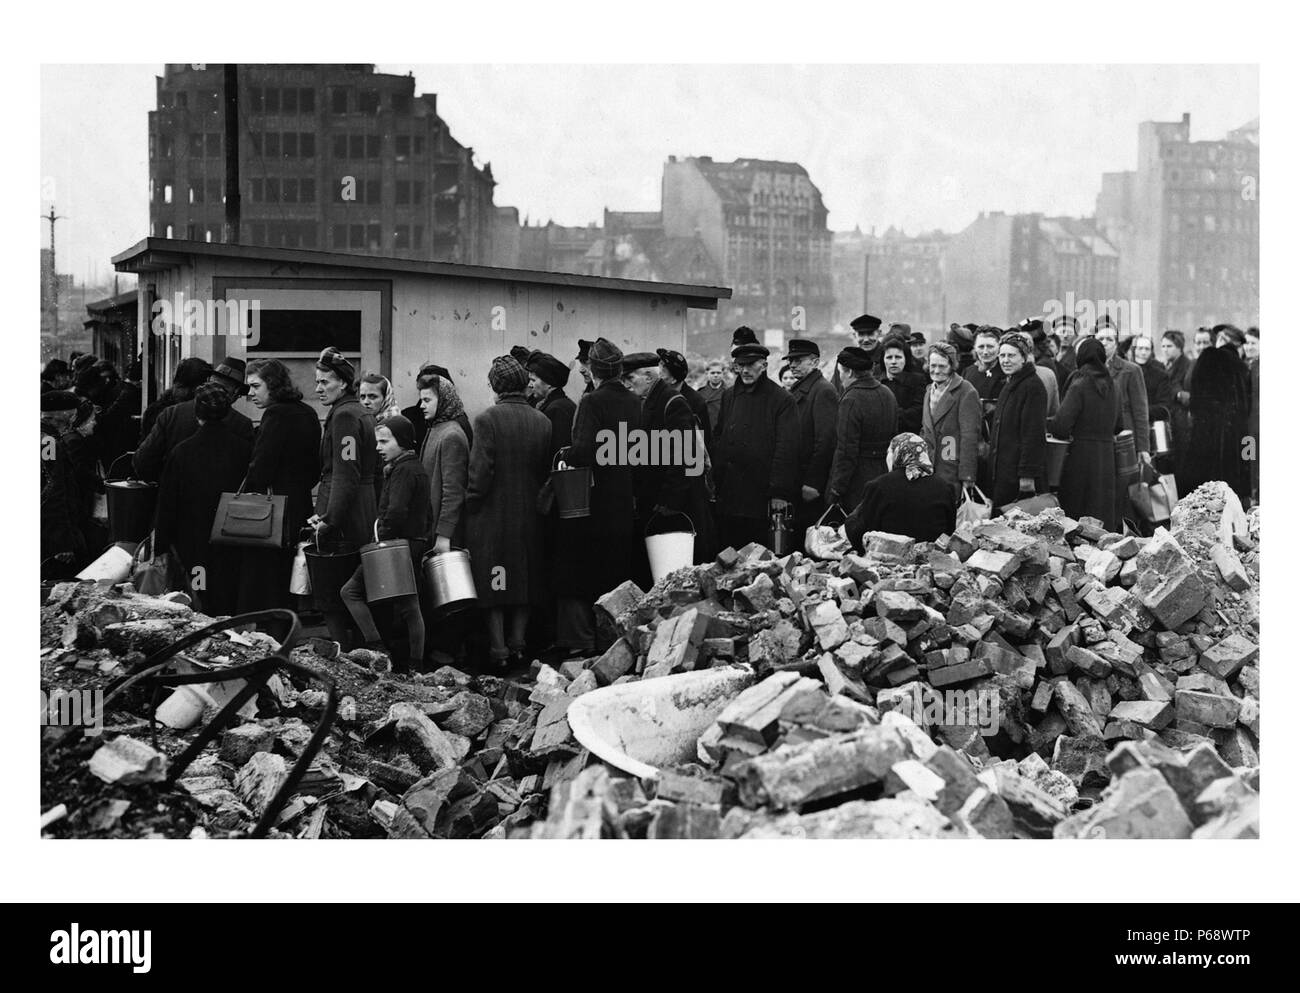 Hungry crowd of people, in the city of Hamburg; Germany March 26, 1946 during the aftermath of World war Two Stock Photo